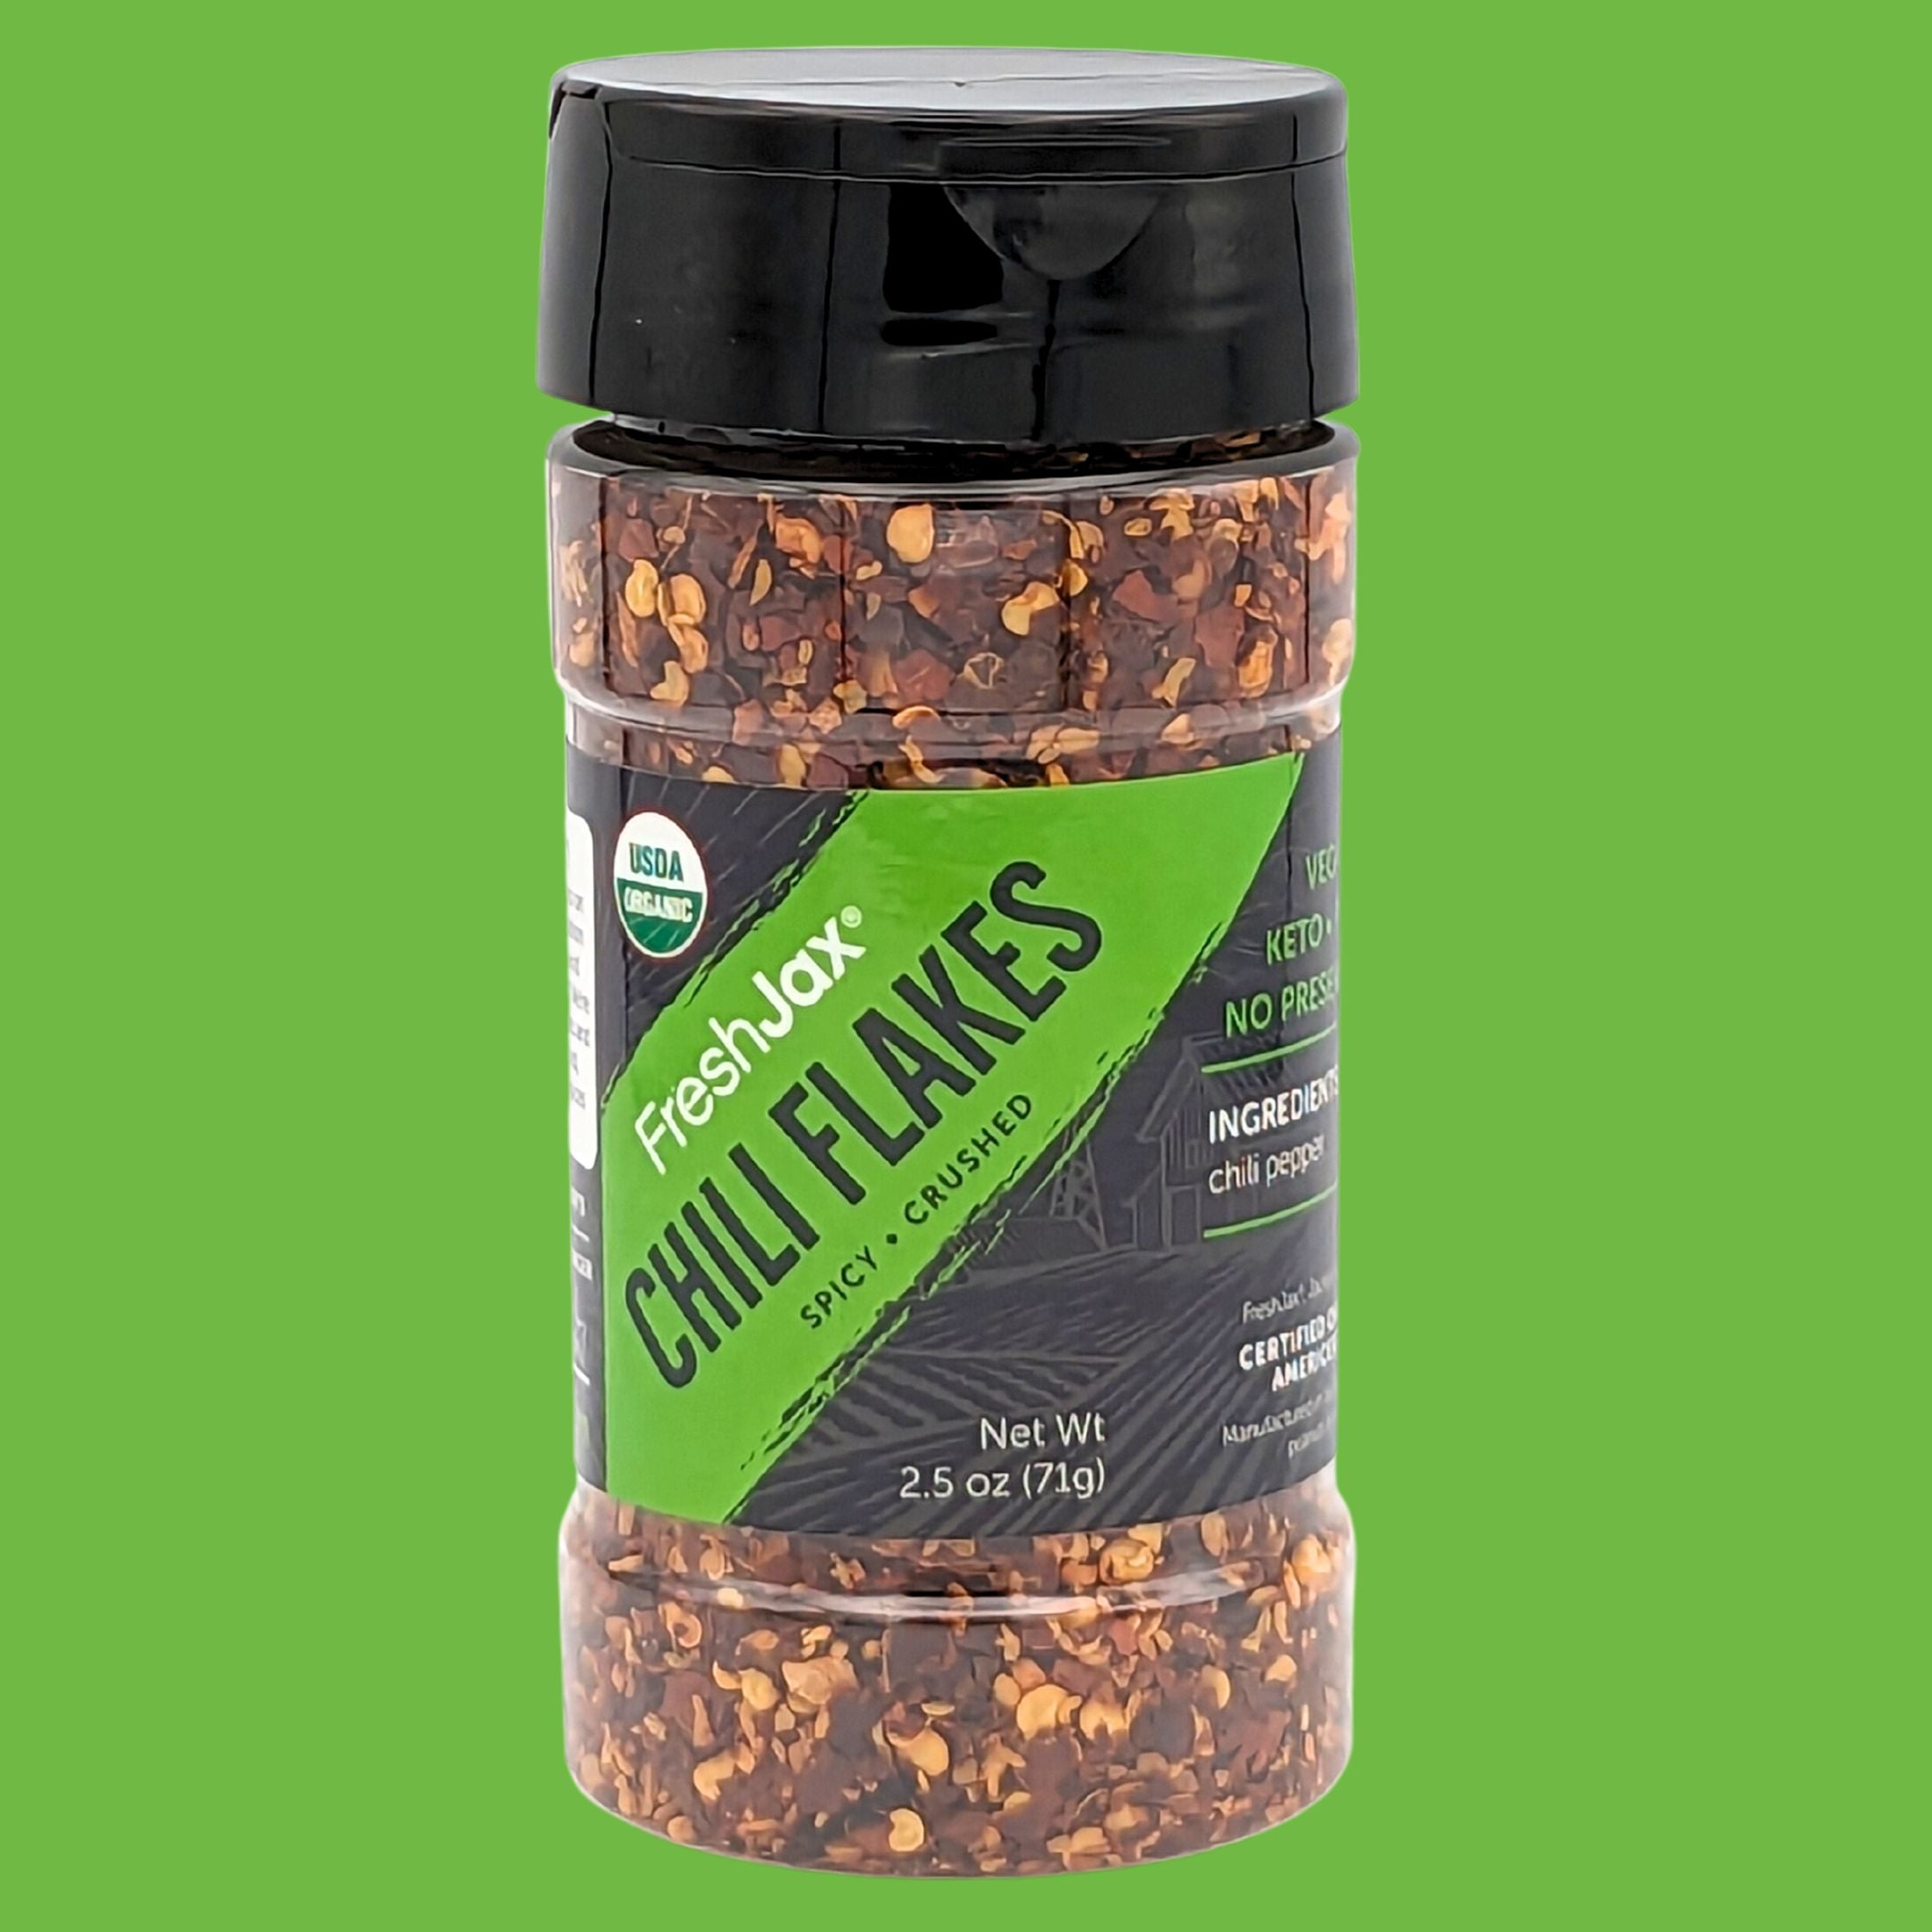 Chili Flakes (Crushed Red Pepper)